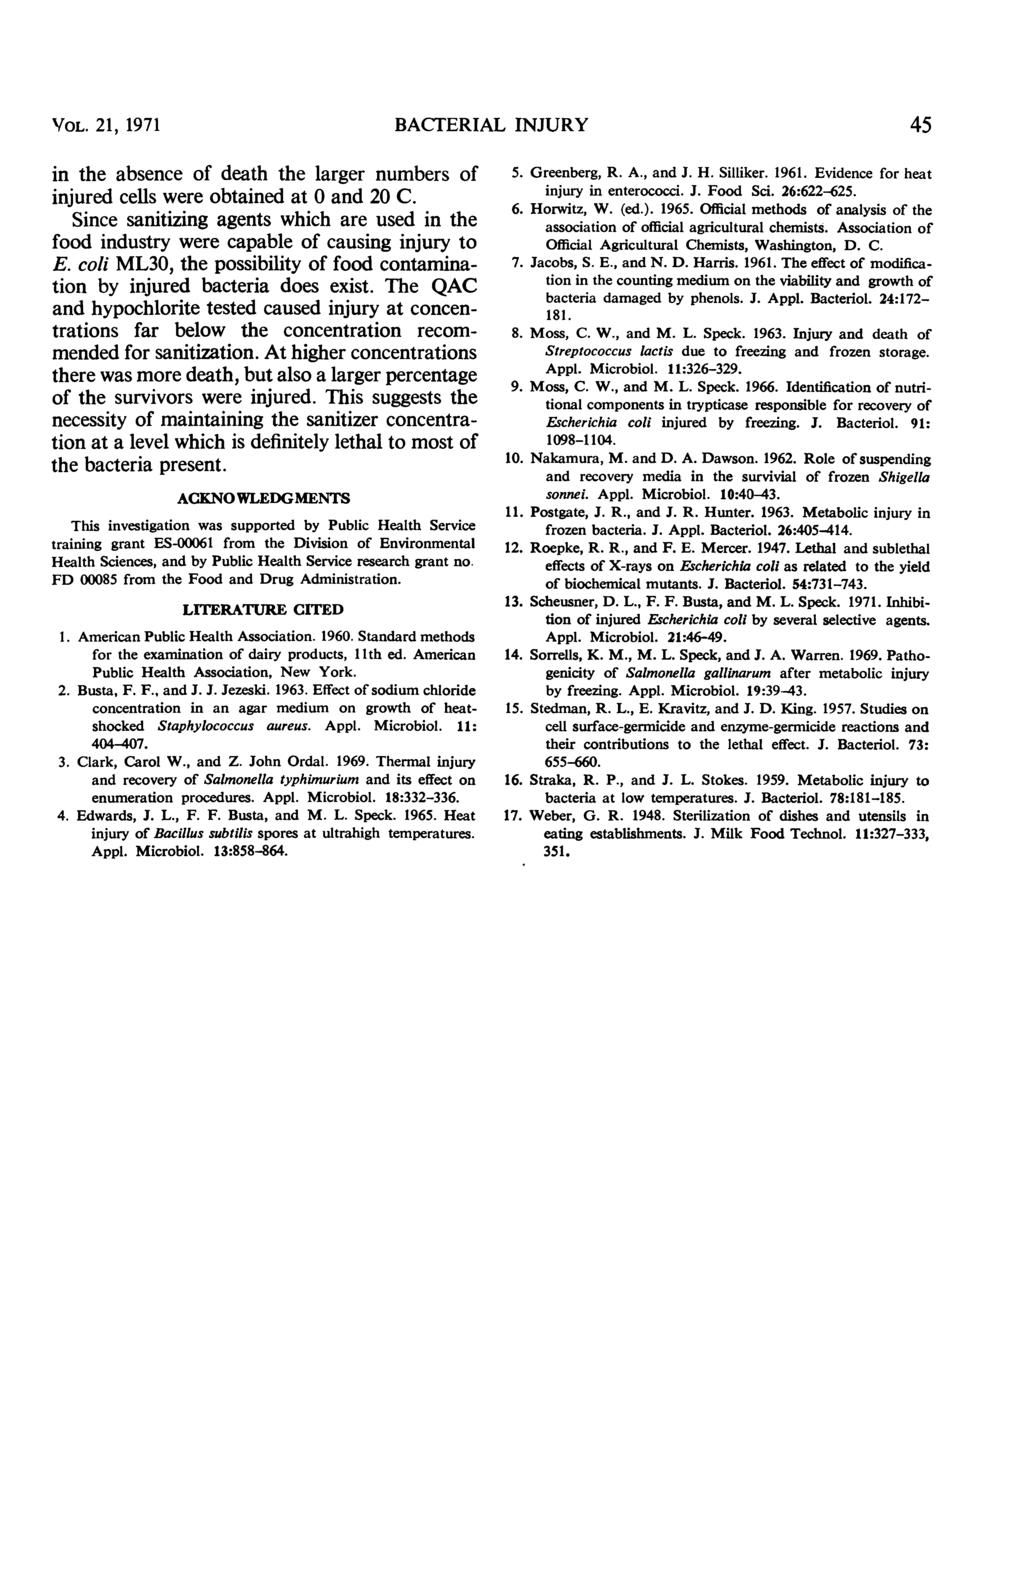 VOL. 21, 1971 BACTRIAL INJURY 45 in the absence of death the larger numbers of injured cells were obtained at and 2 C.